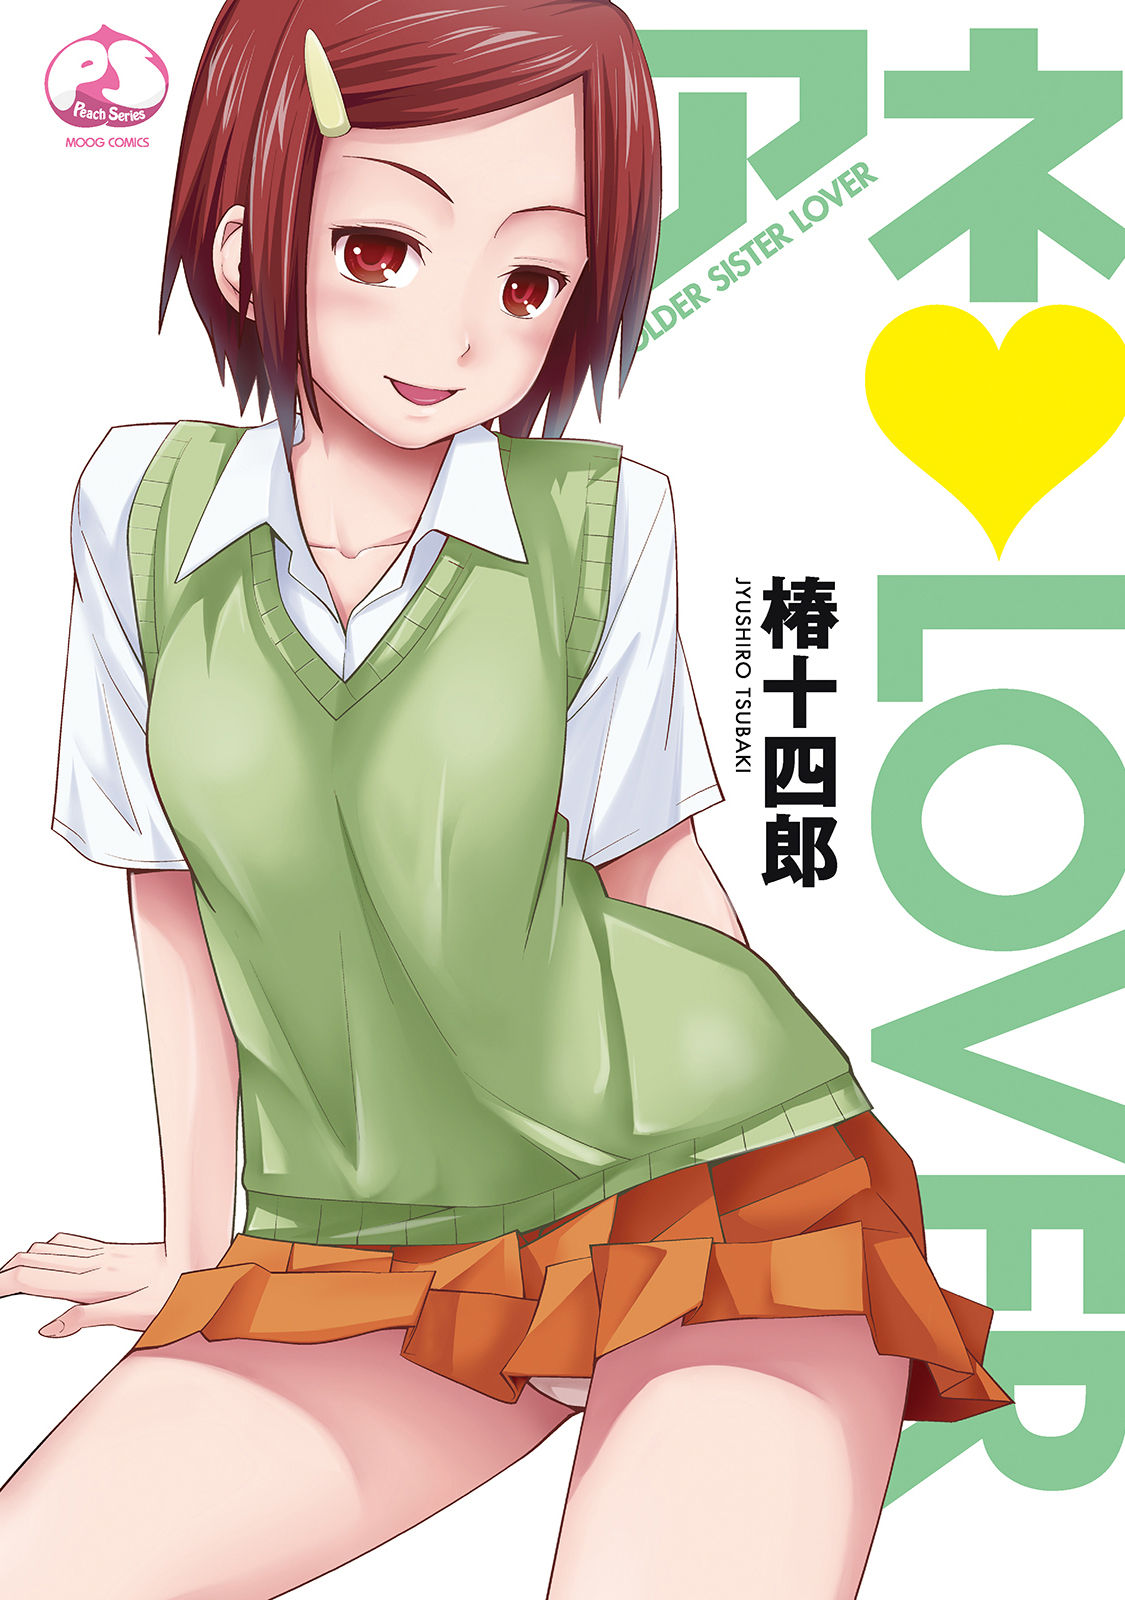 001 cover